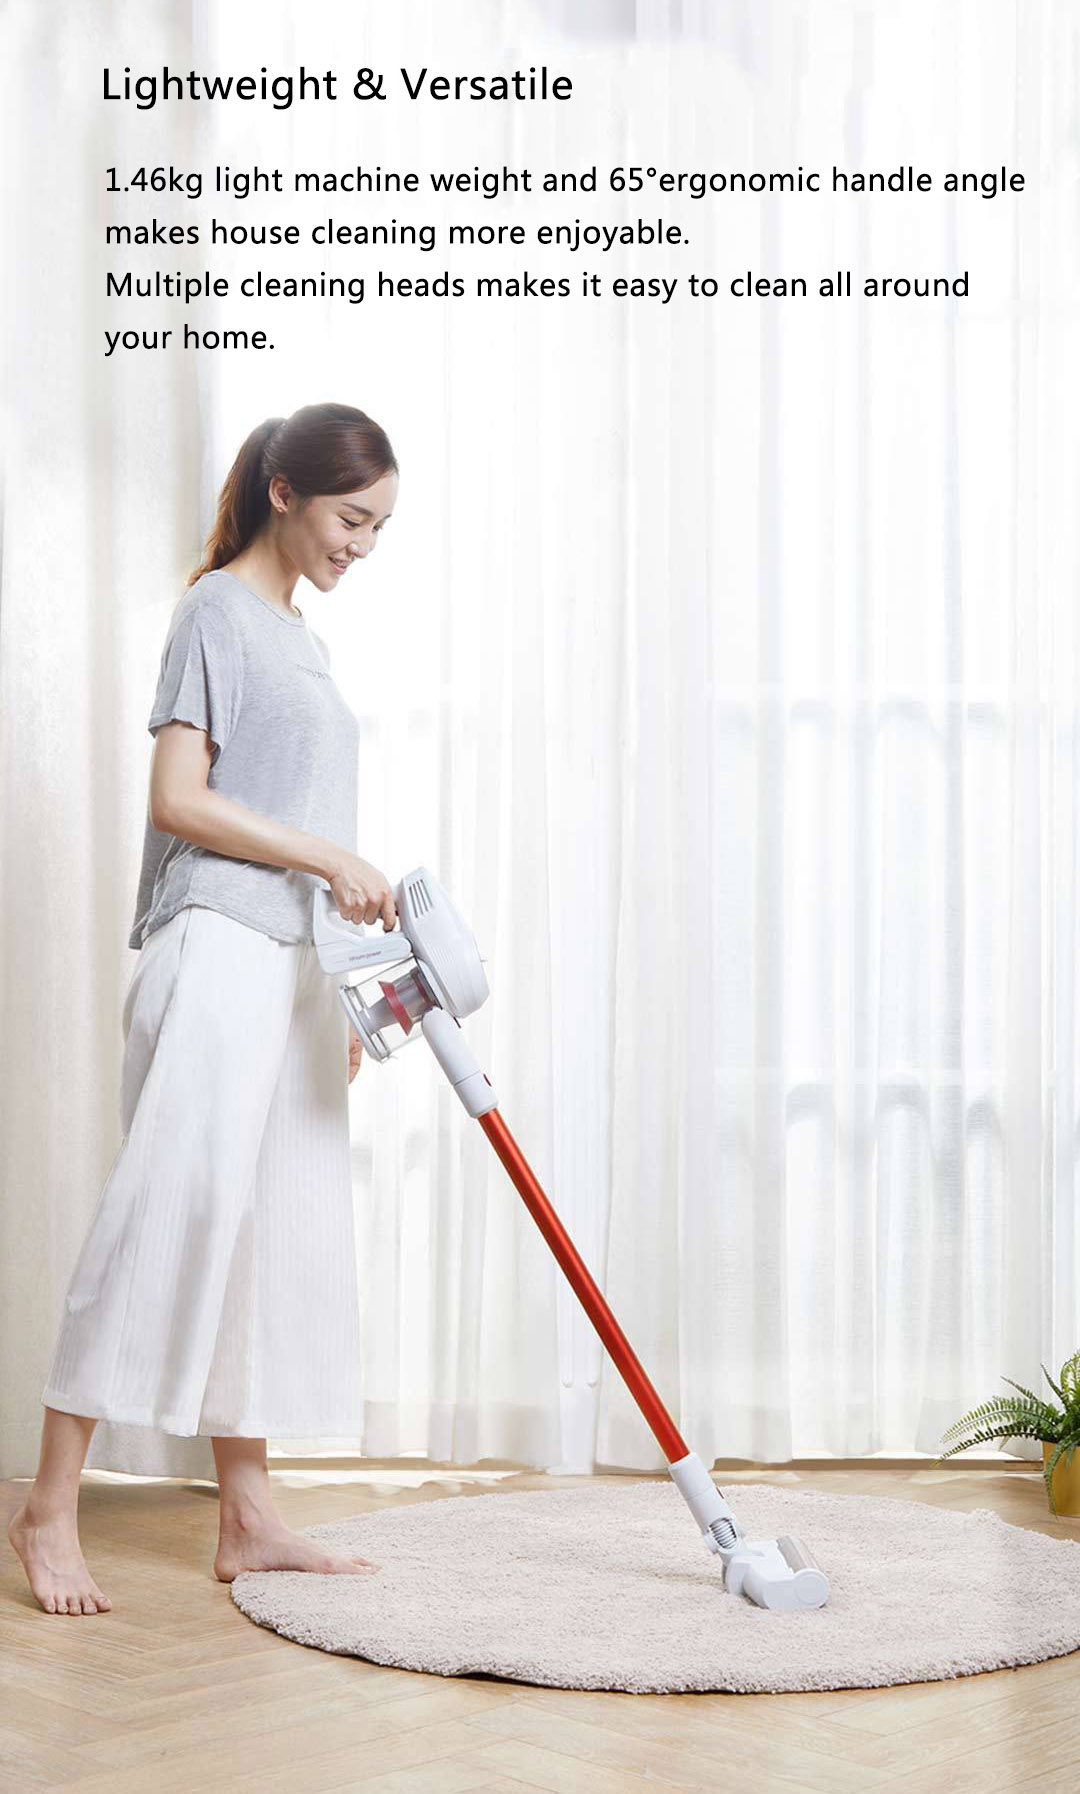 Xiaomi JIMMY JY51 Lightweight Cordless Stick Vacuum Cleaner 115AW Powerful Suction Anti-wrapped Brush Anti-mite Brush - Red